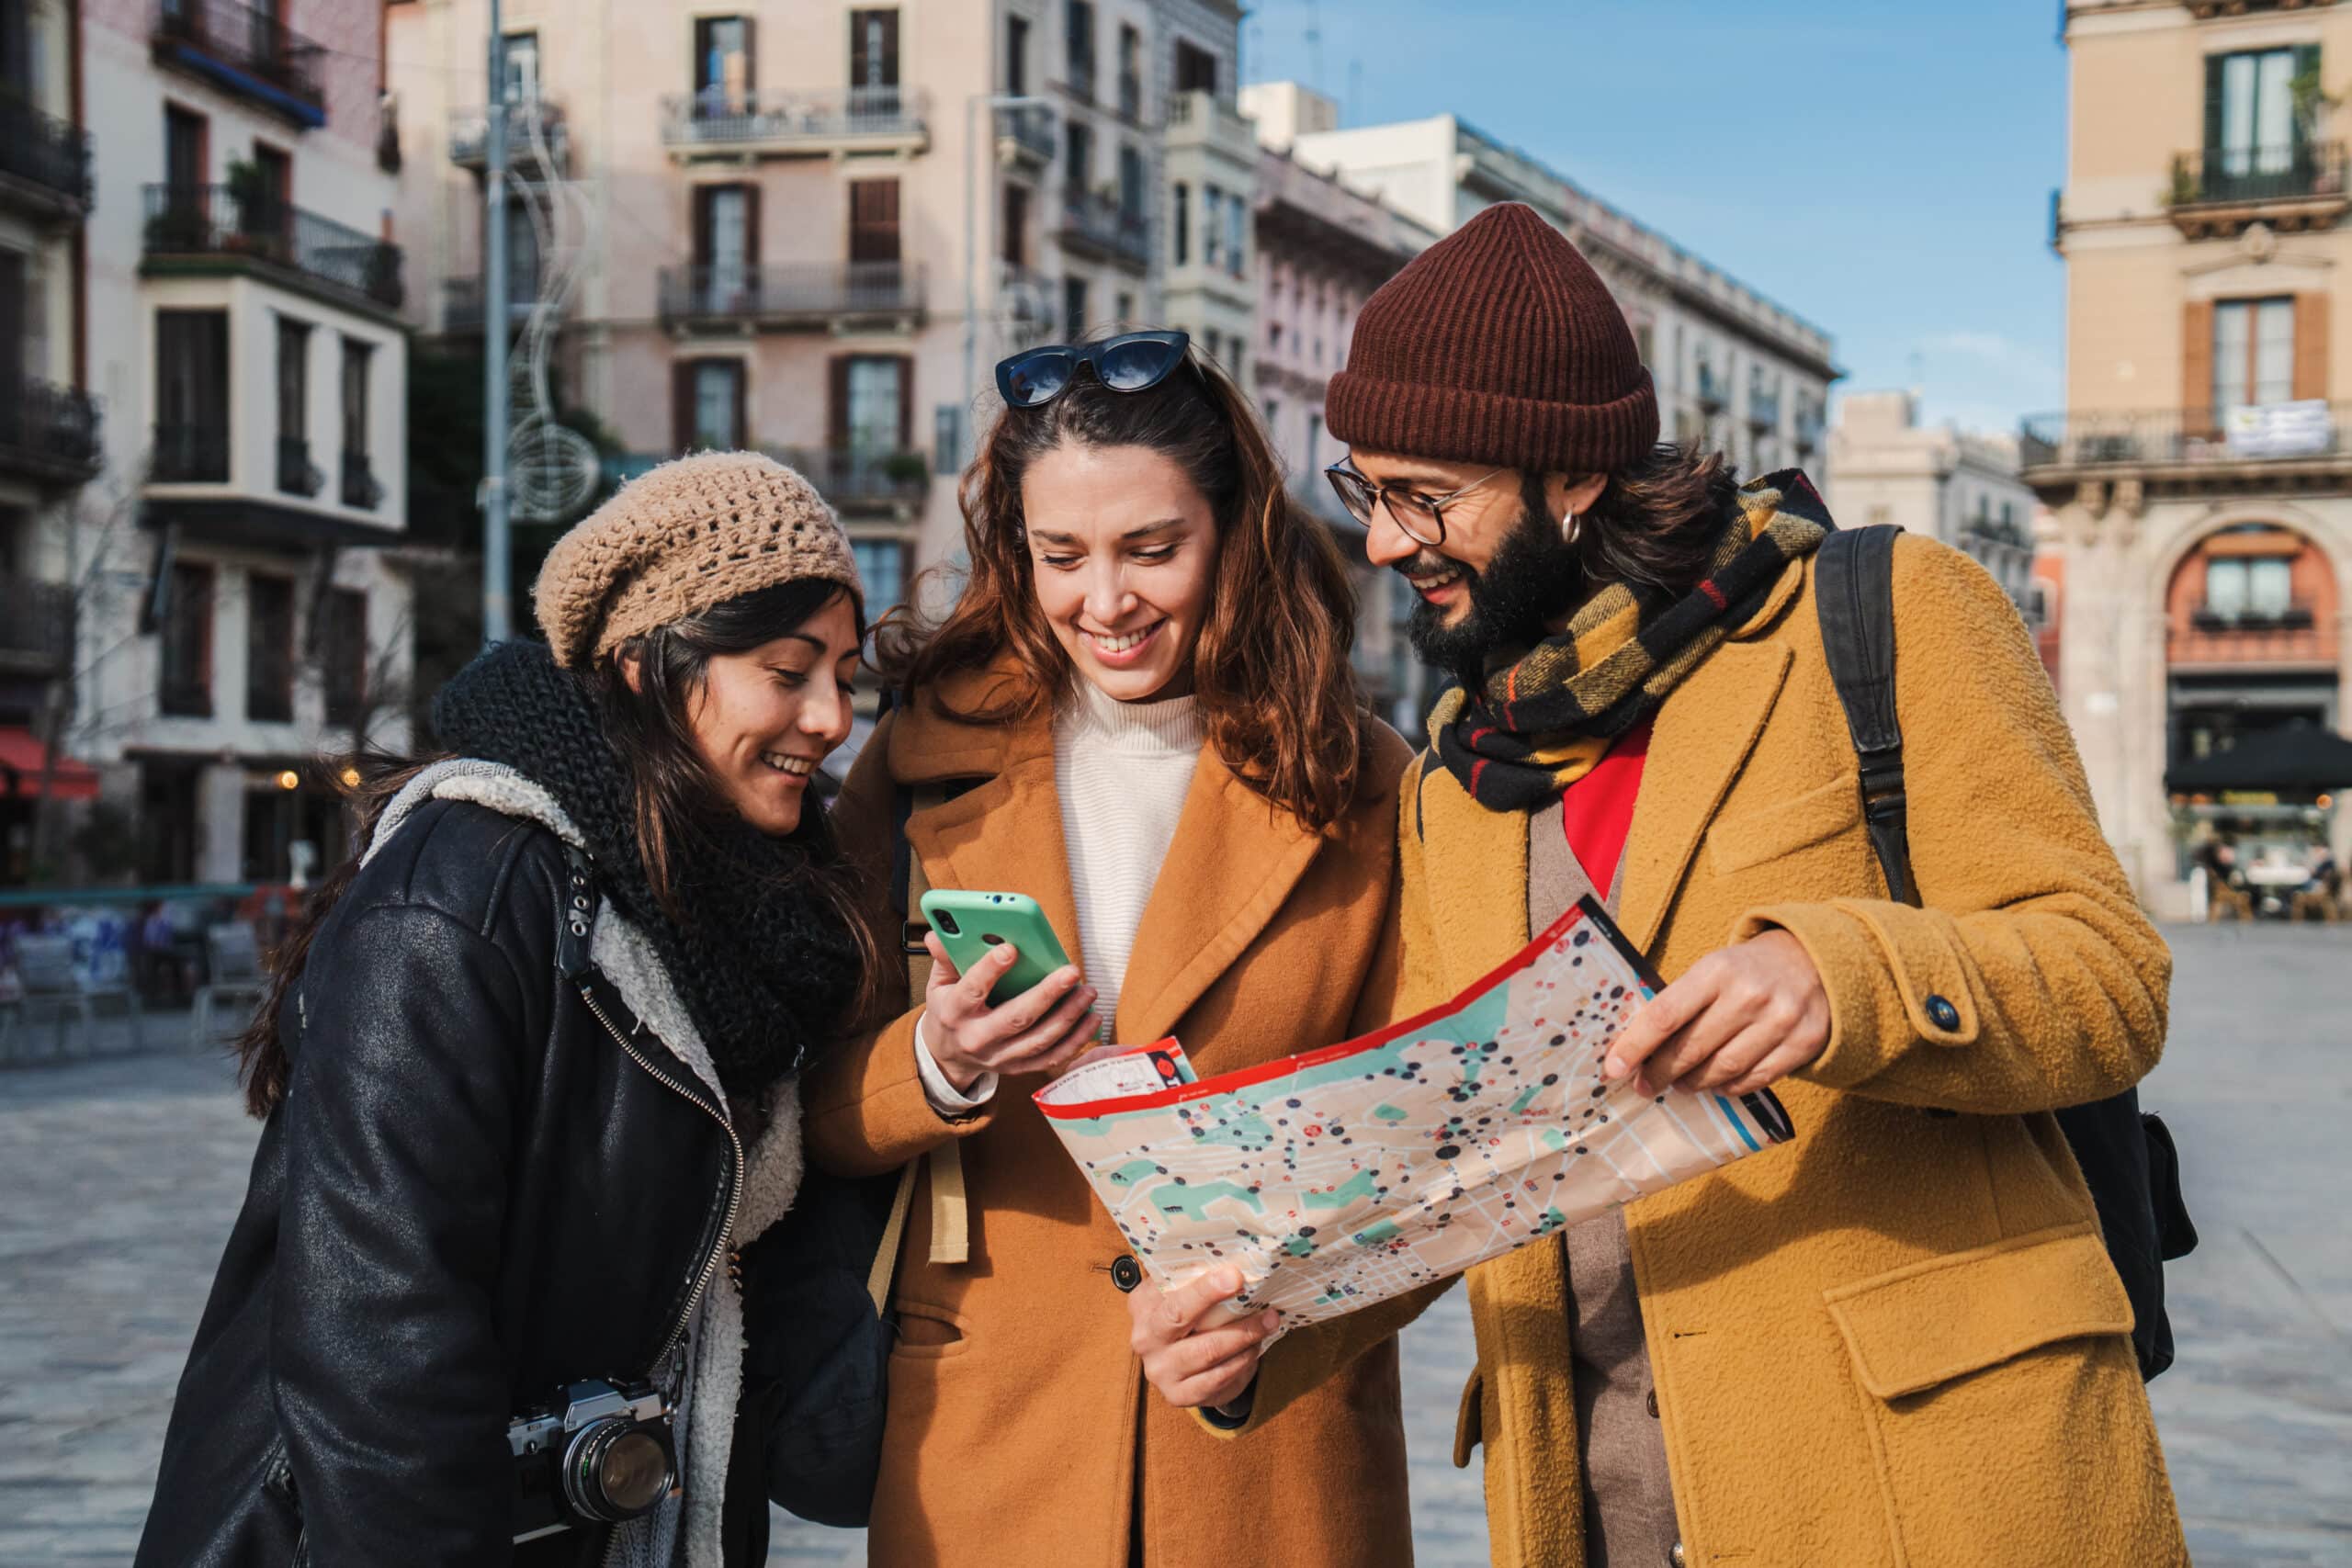 Group of tourist people sightseeing and searching a location on a map and on a smartphone app on a weekeand trip. Young travelers smiling looking together for directions on a guide visiting a city. High quality photo